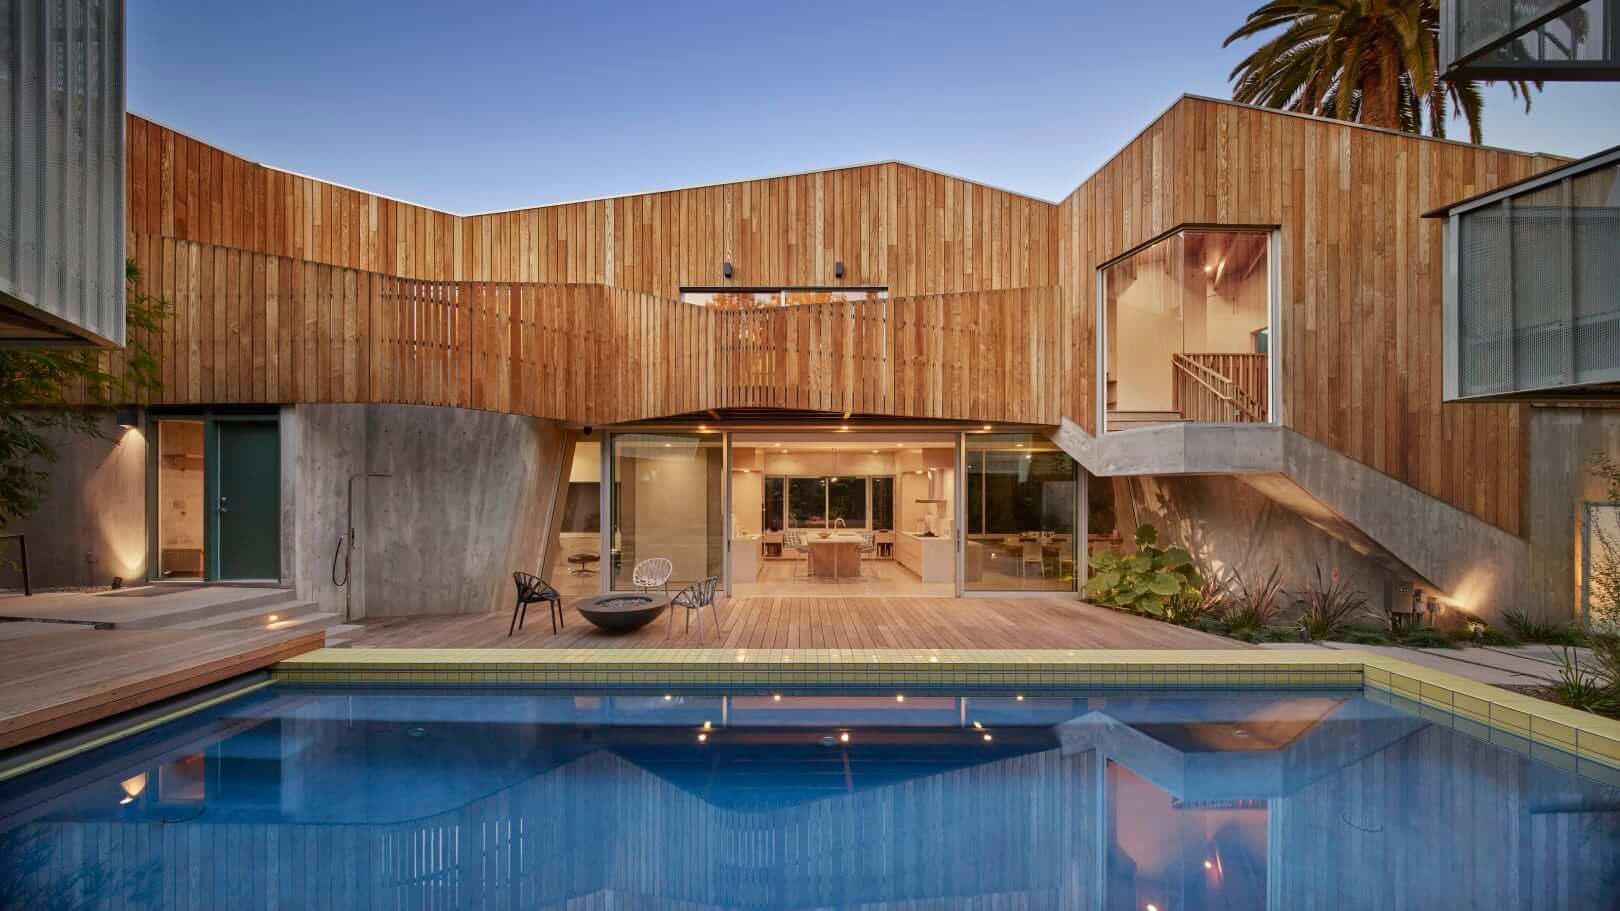 a wooden house in venice, california